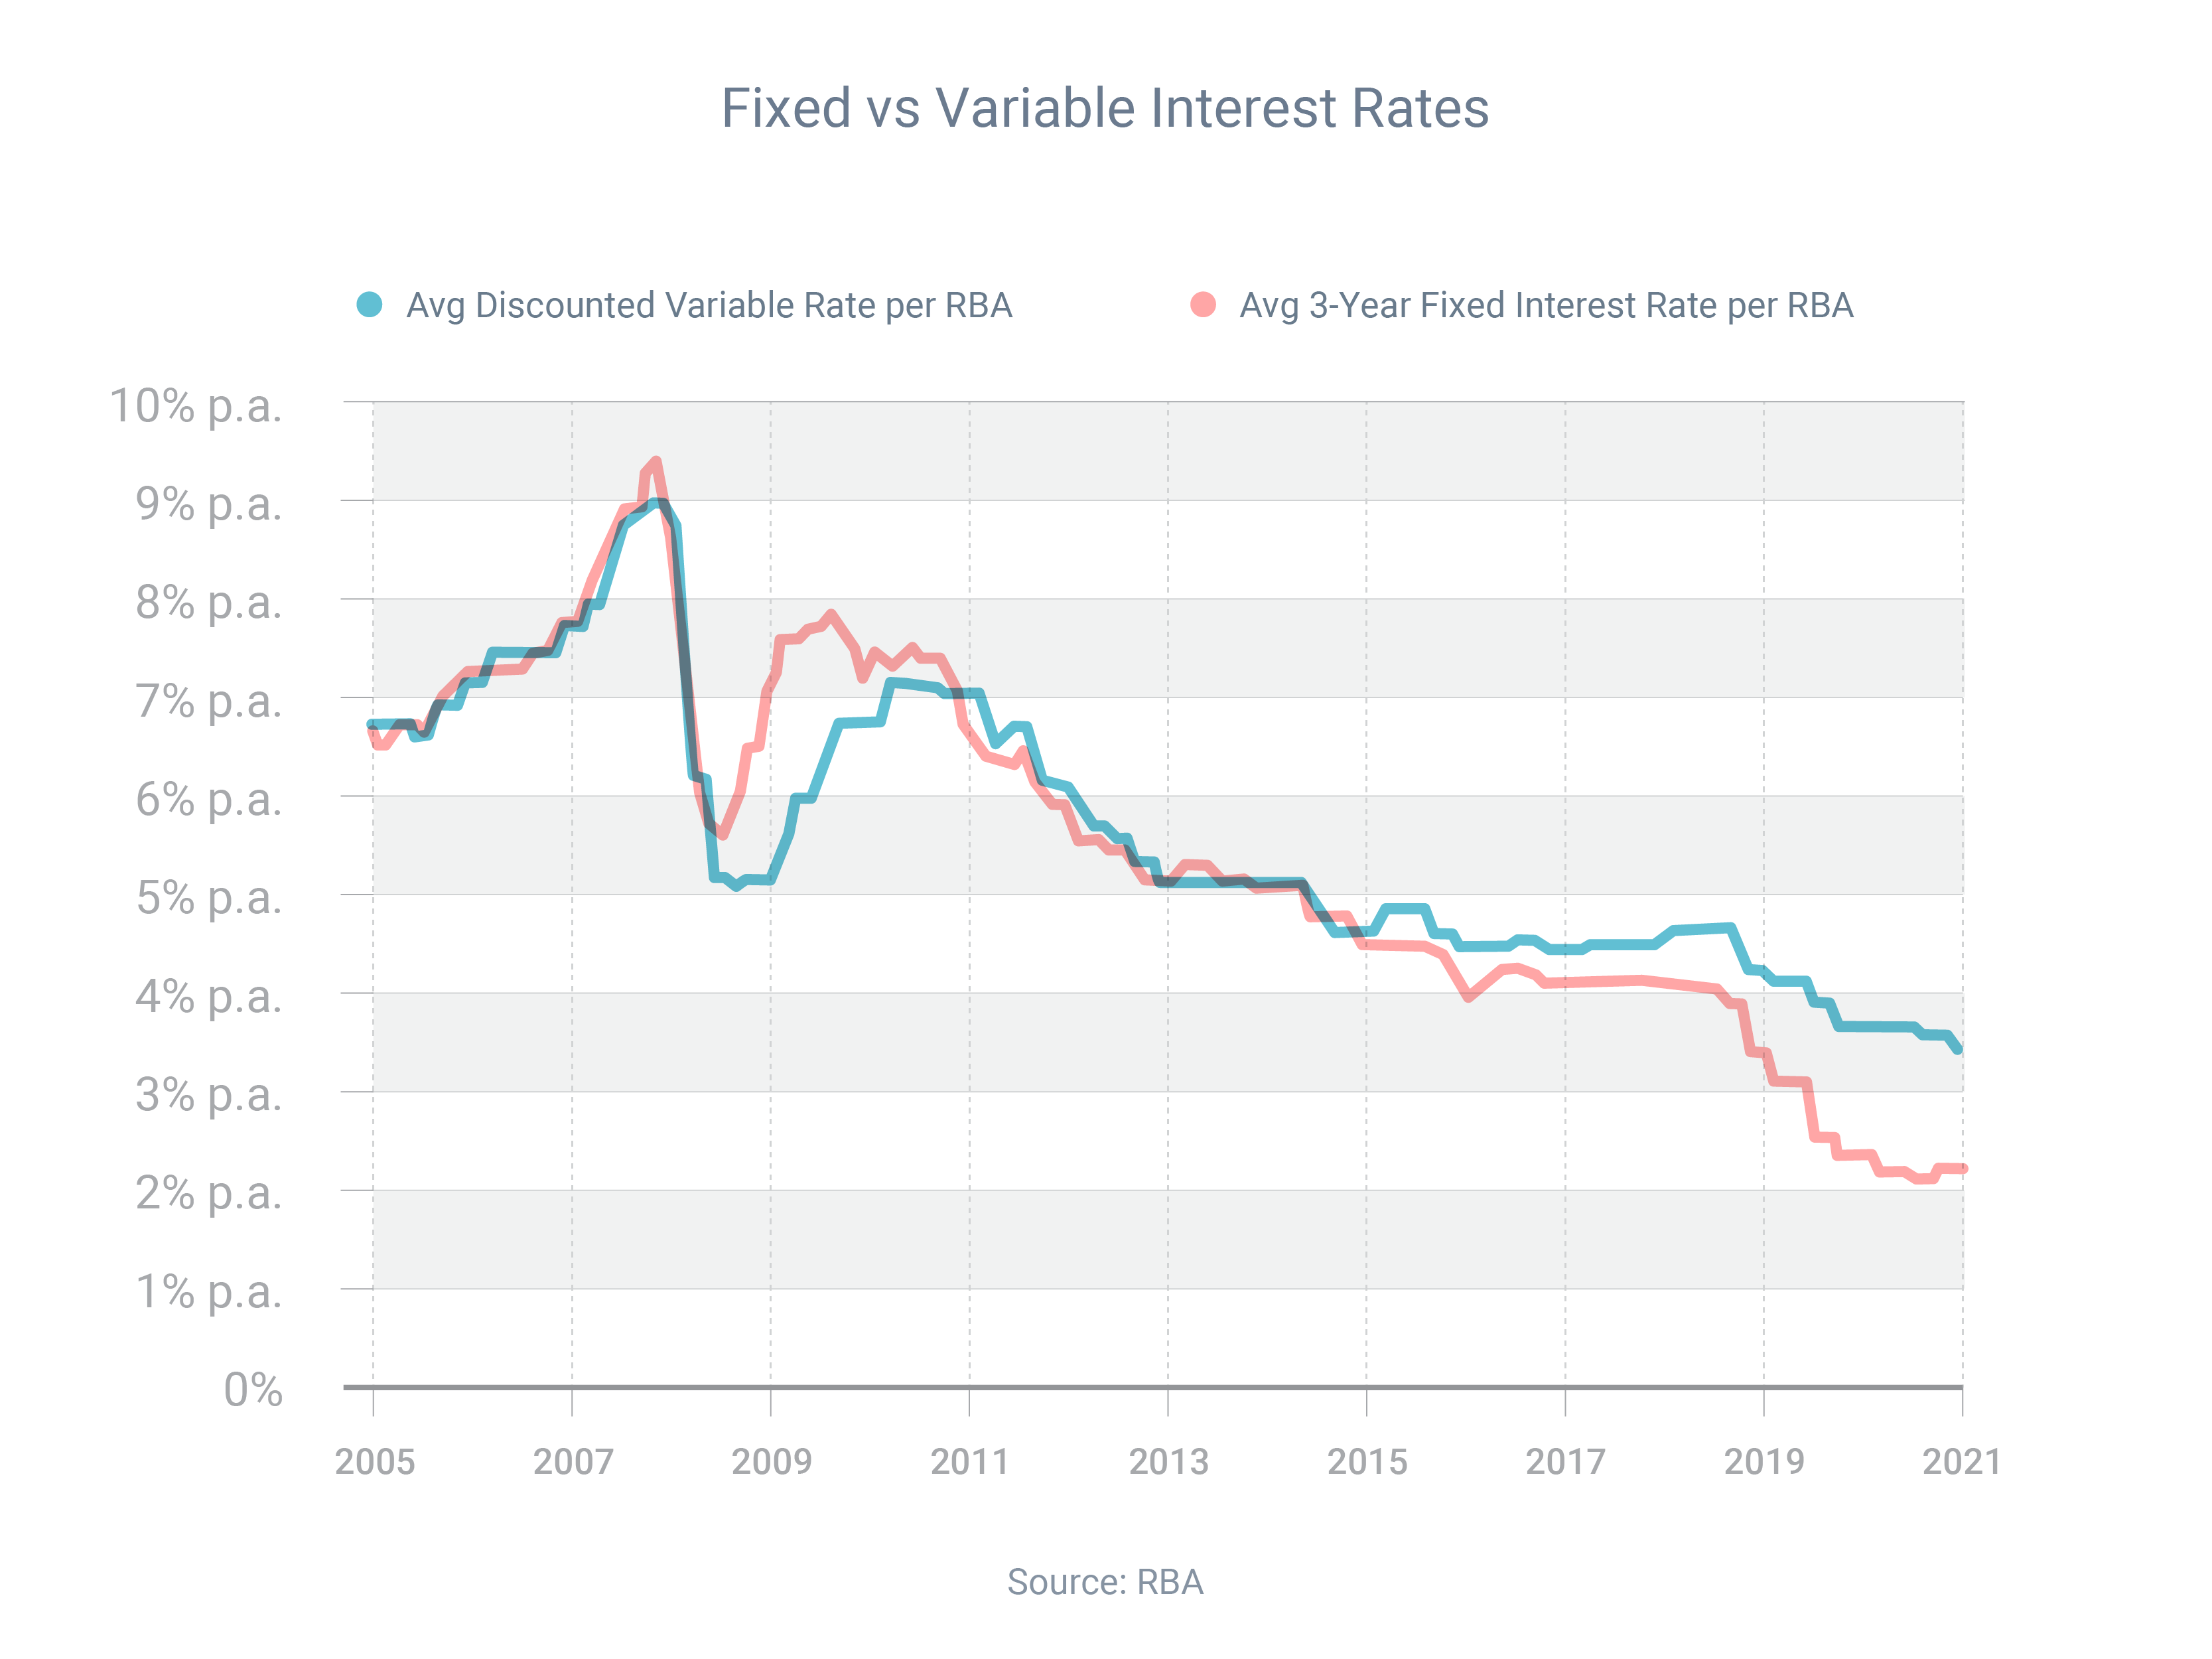 Fixed vs variable rate 2005-2021